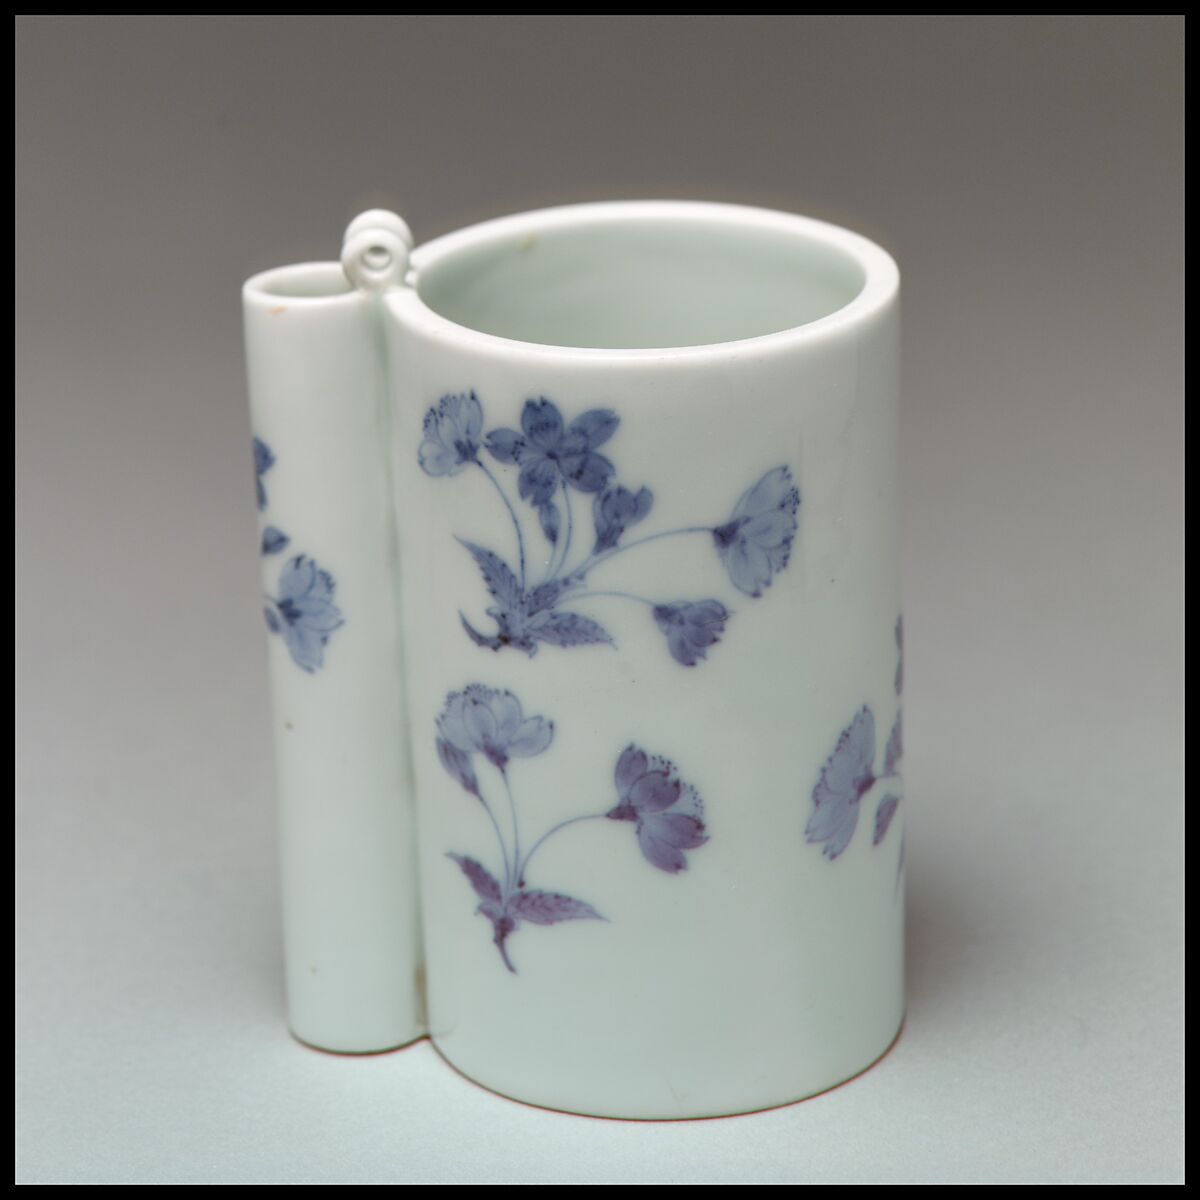 Brush Holder in form of a bird-feeding vessel, Porcelain decorated with blue under the glaze (Hirado ware), Japan 